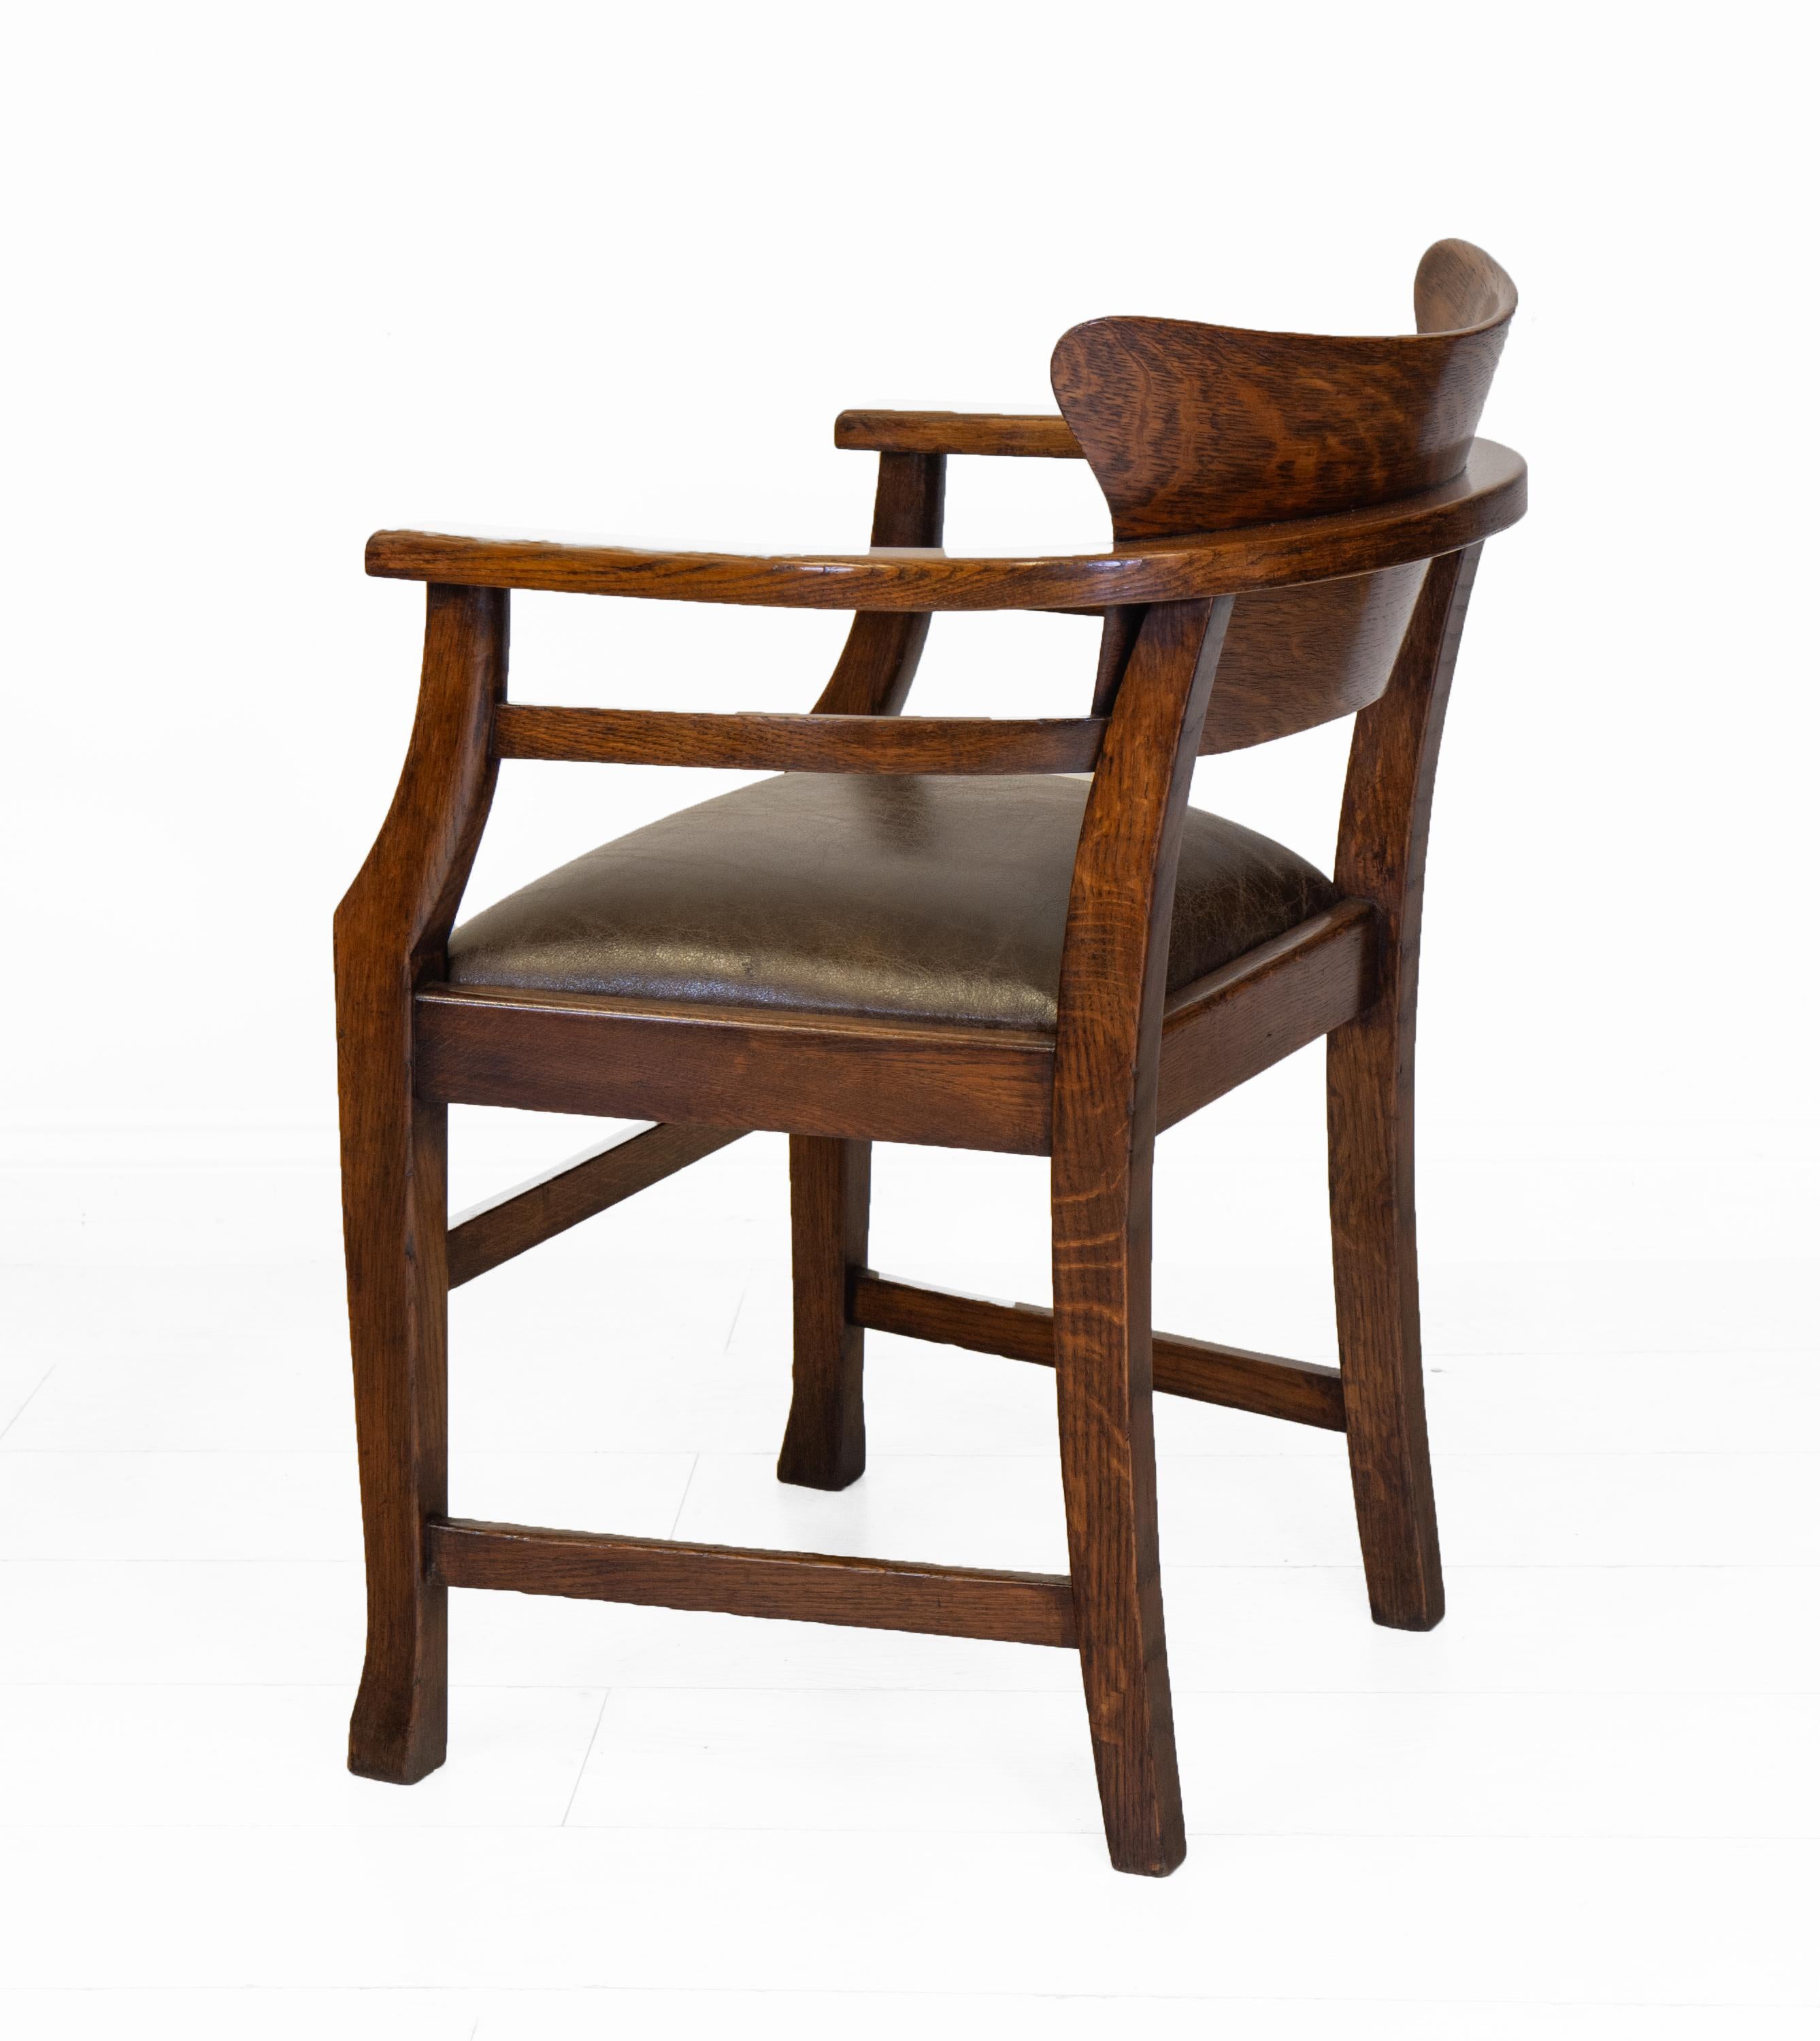 Arts & Crafts oak and leather desk chair, Jugendstil, in the Richard Riemerschmid manner. Retailer's label: Solomon Bros, London. Circa 1900. 

The chair is stamped E.S. to the underside, presumably the cabinetmaker. 

The chair has a continuous arm